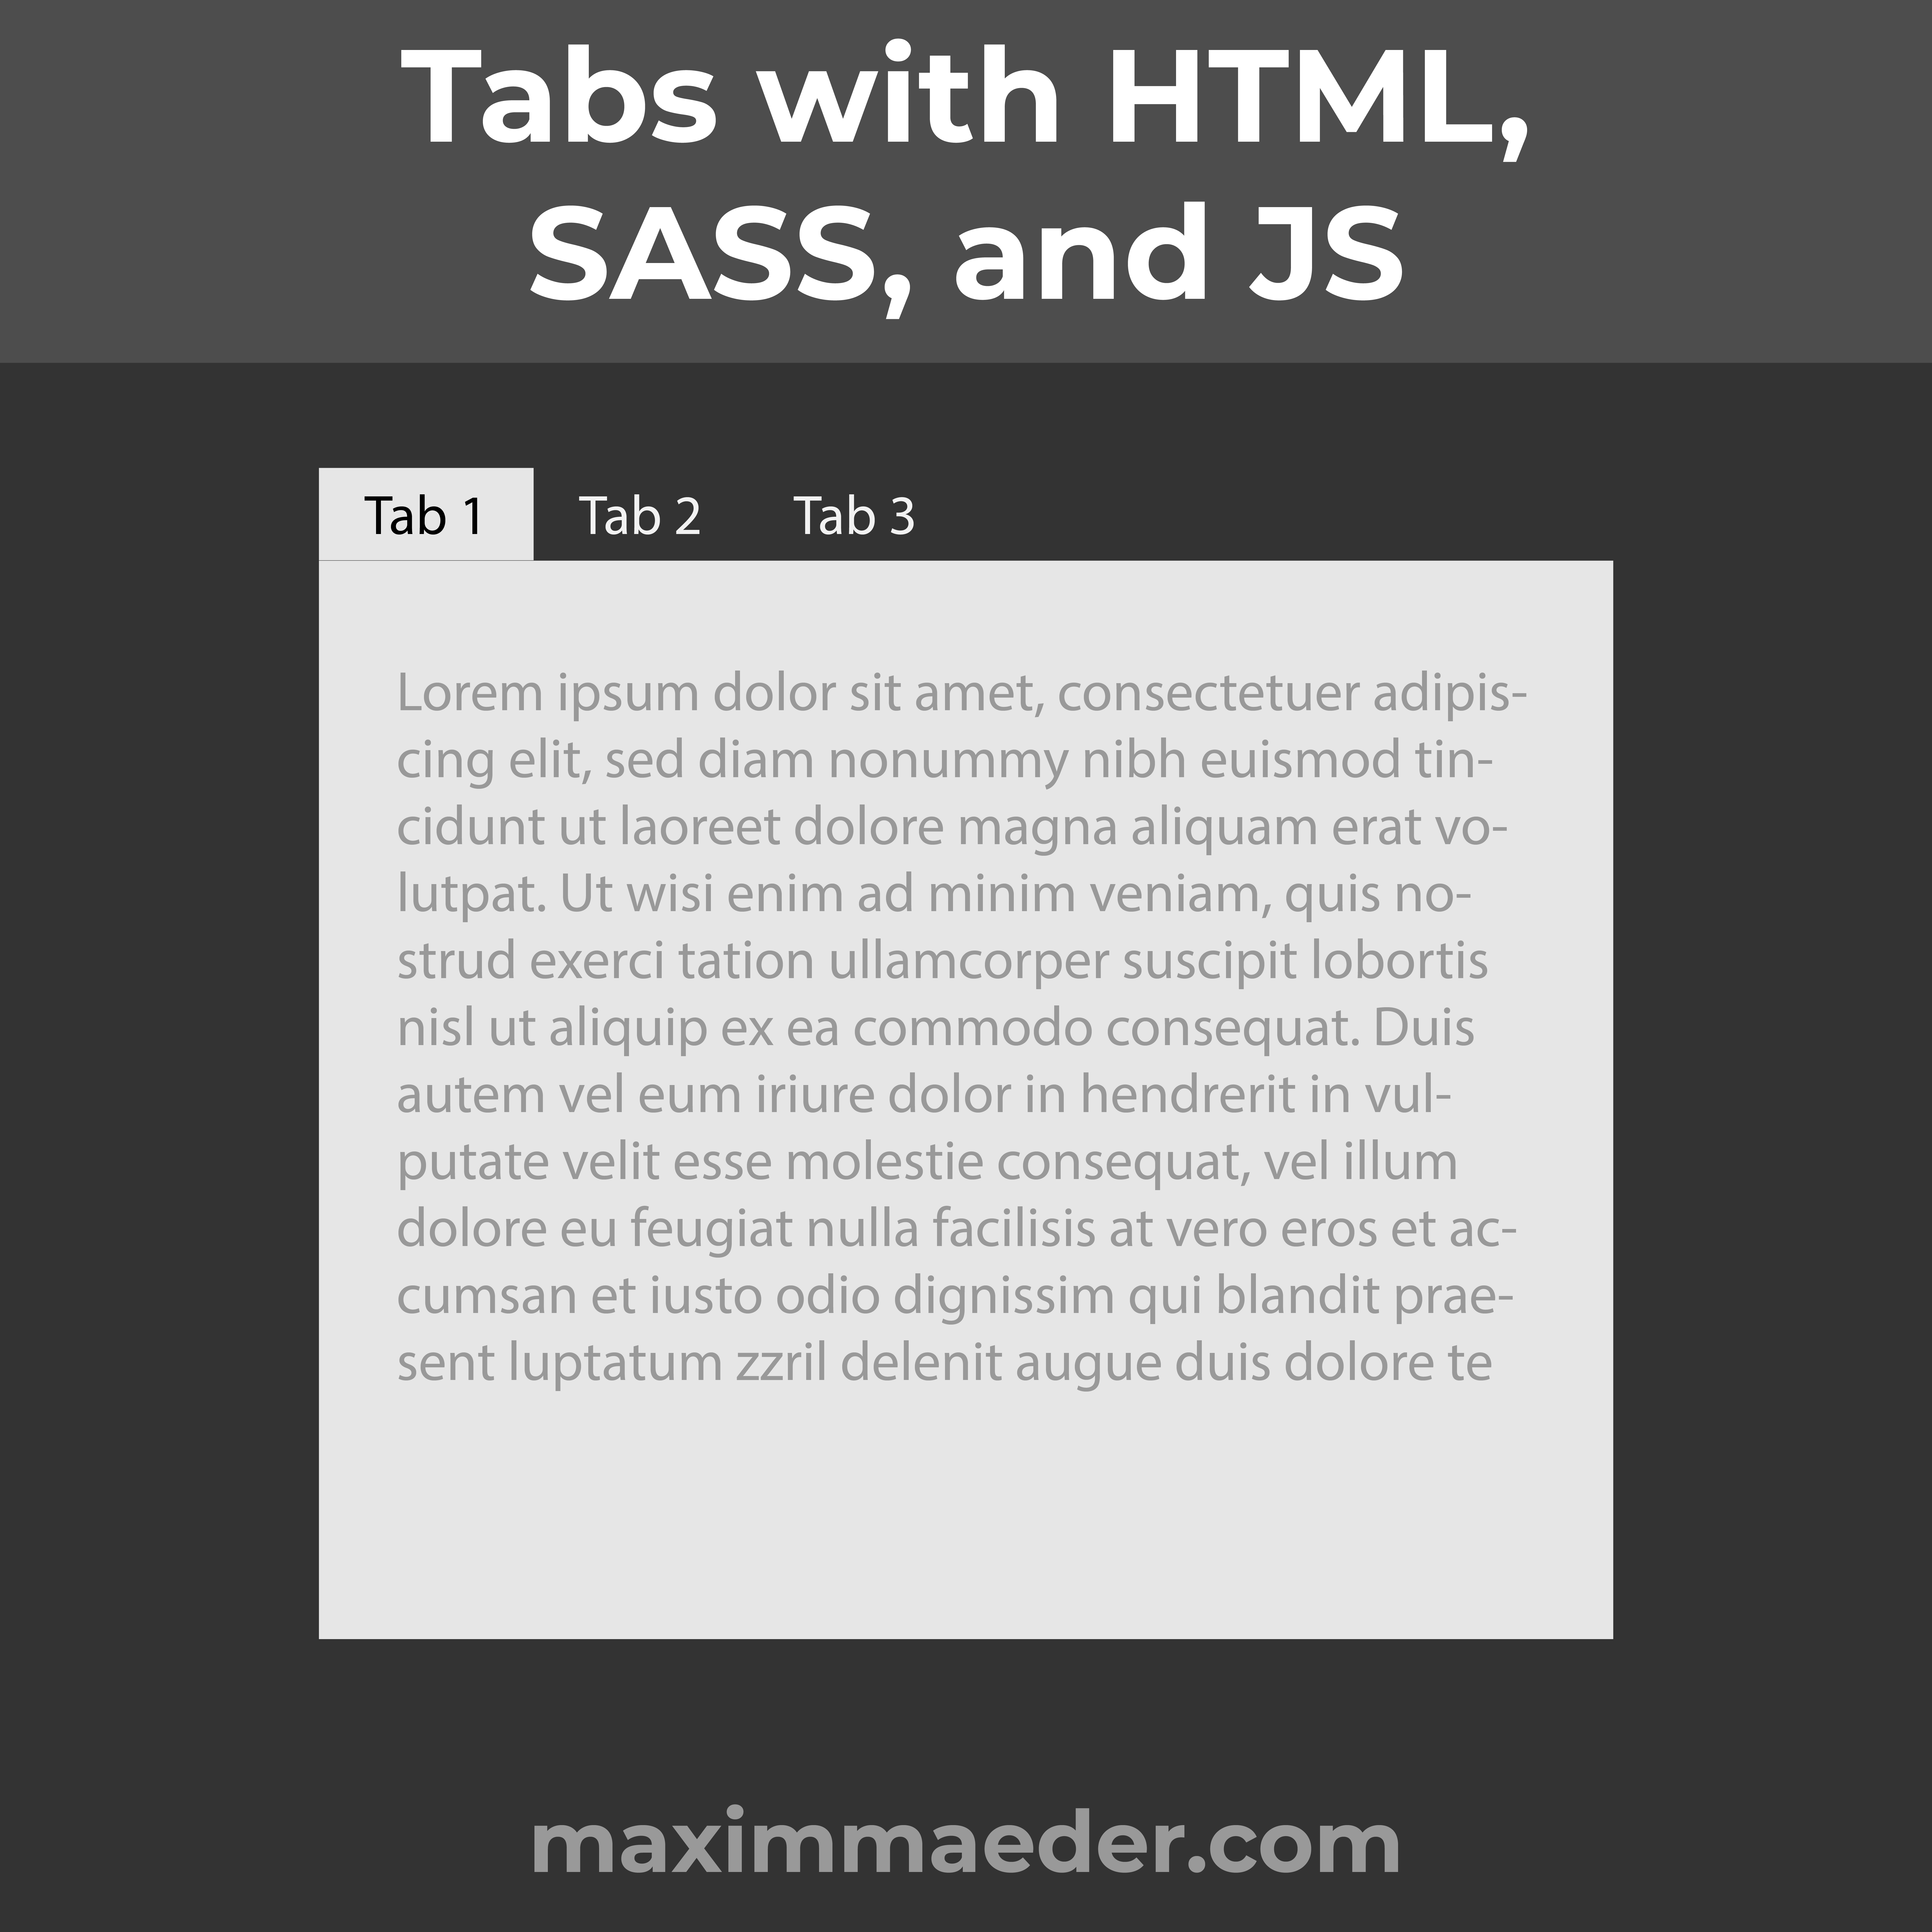 Tabs with HTML, SASS, and JS